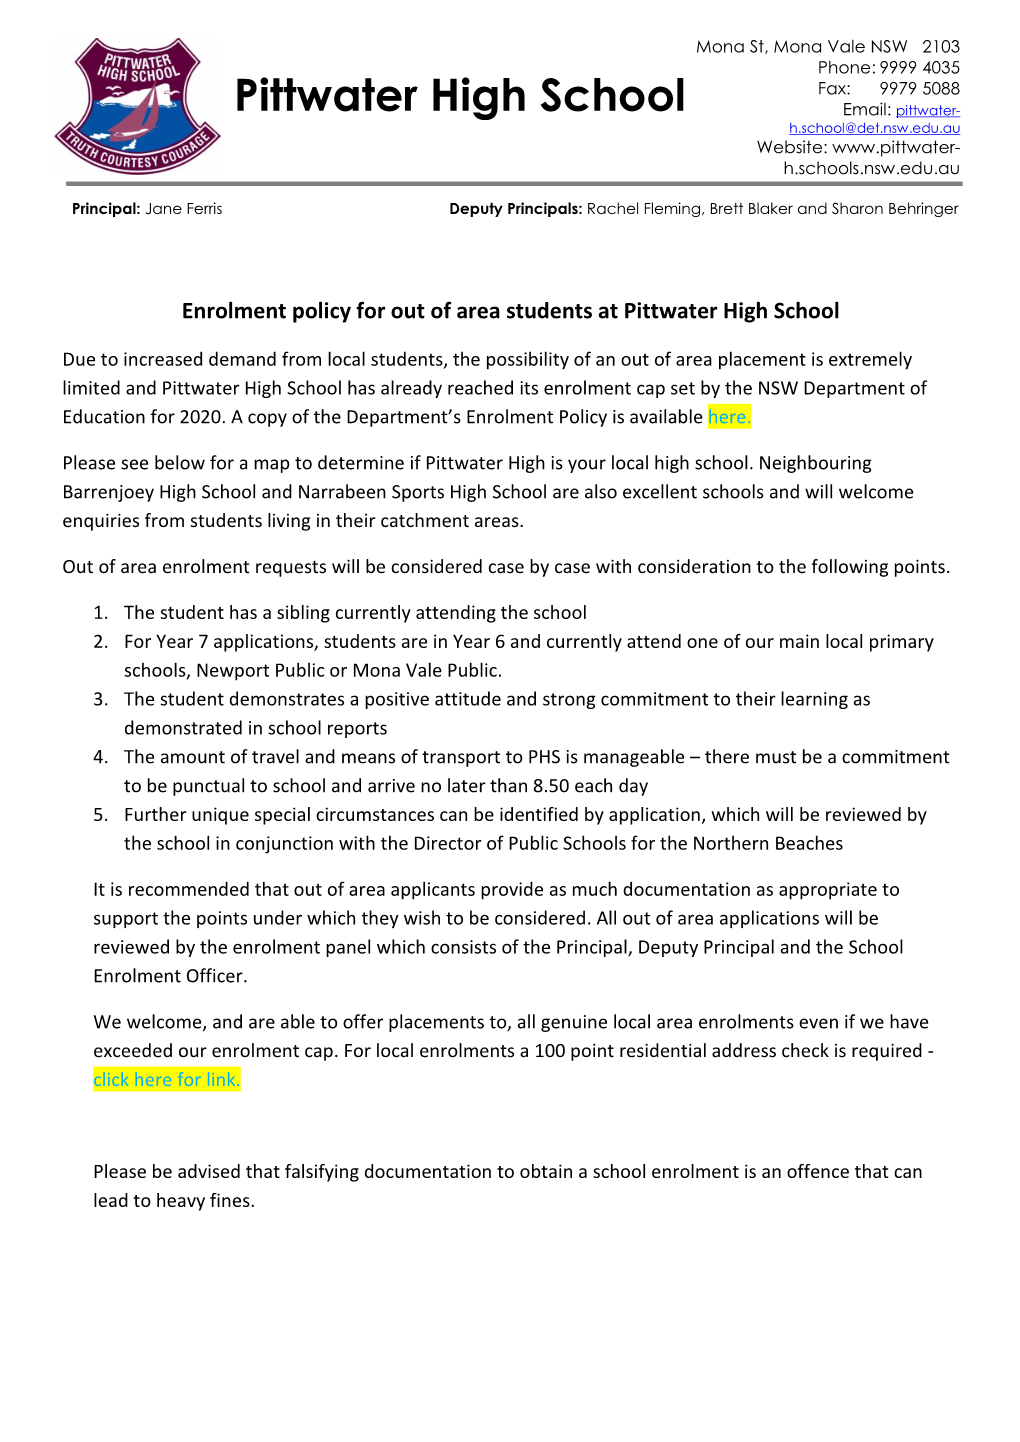 Pittwater High School Enrolment Policy on This Page